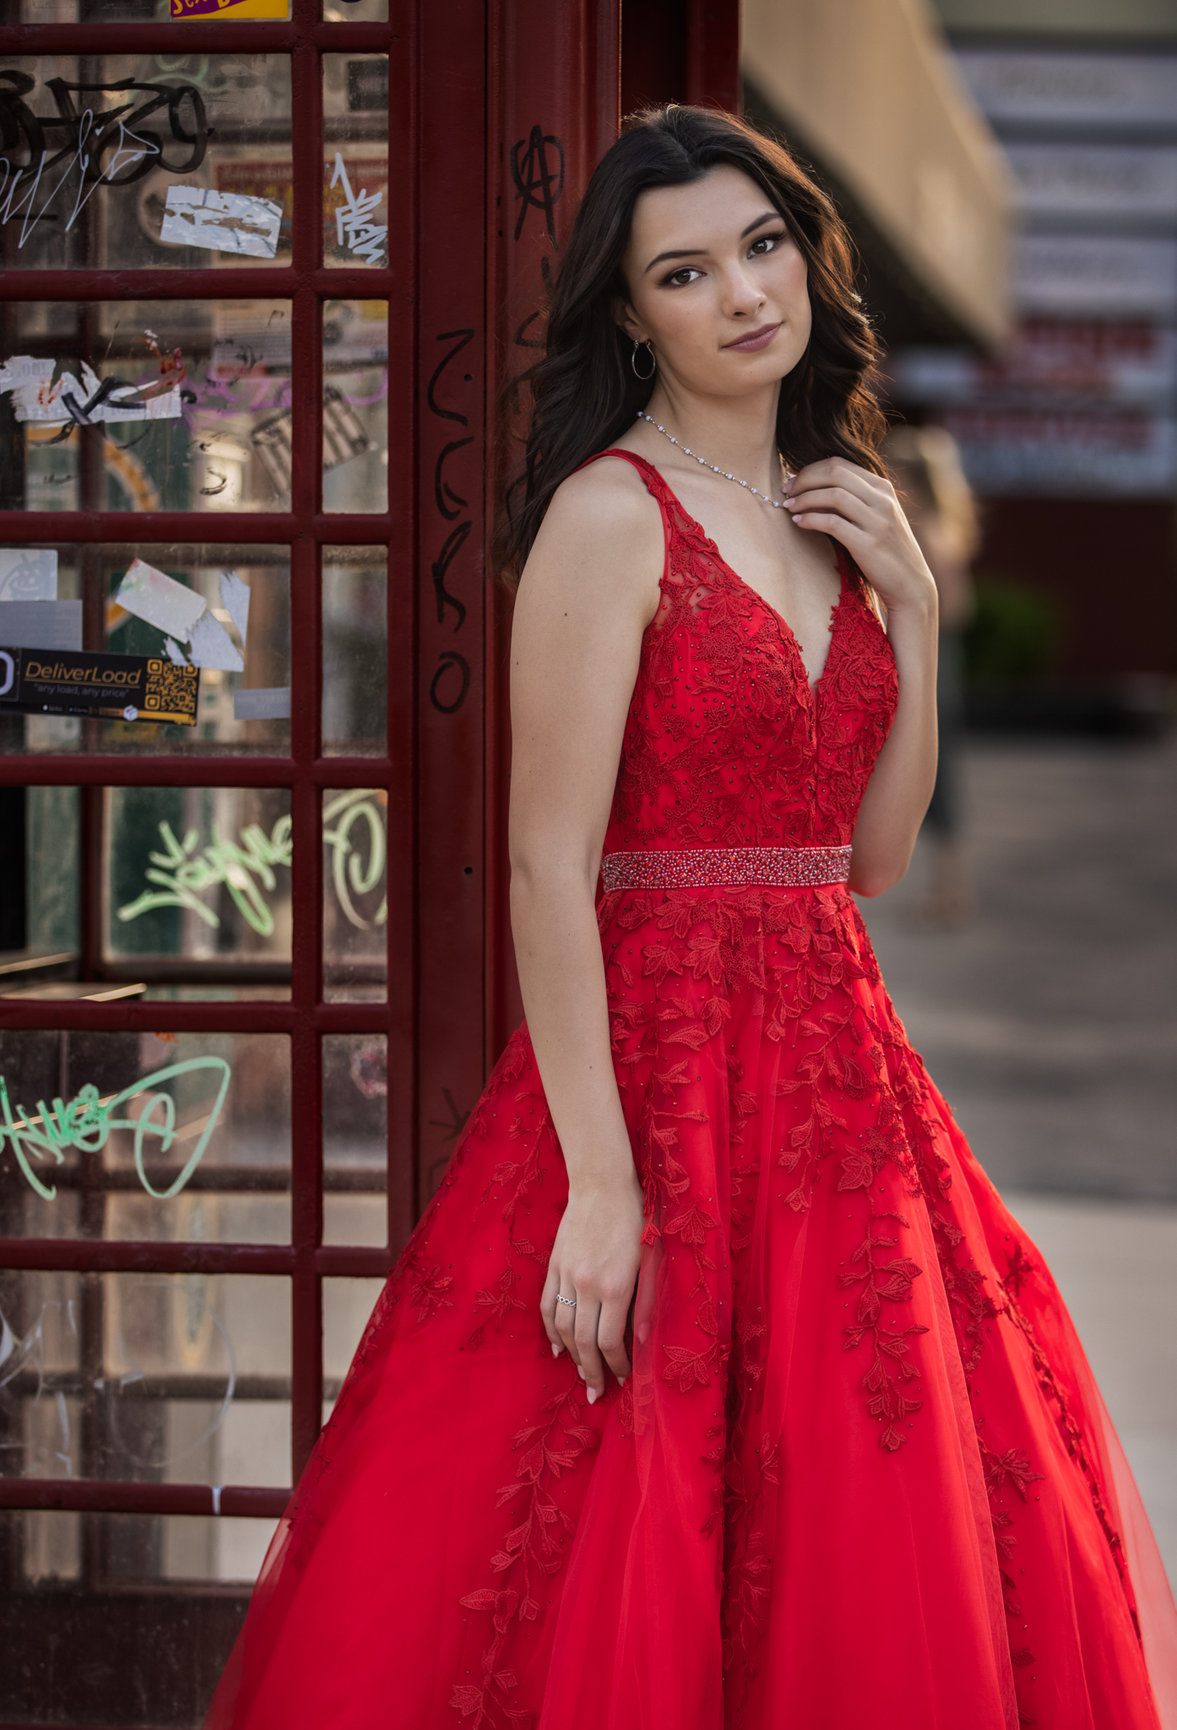 A Glamourous Grad Portrait Experience in Kensington - Laurie MacBrown ...